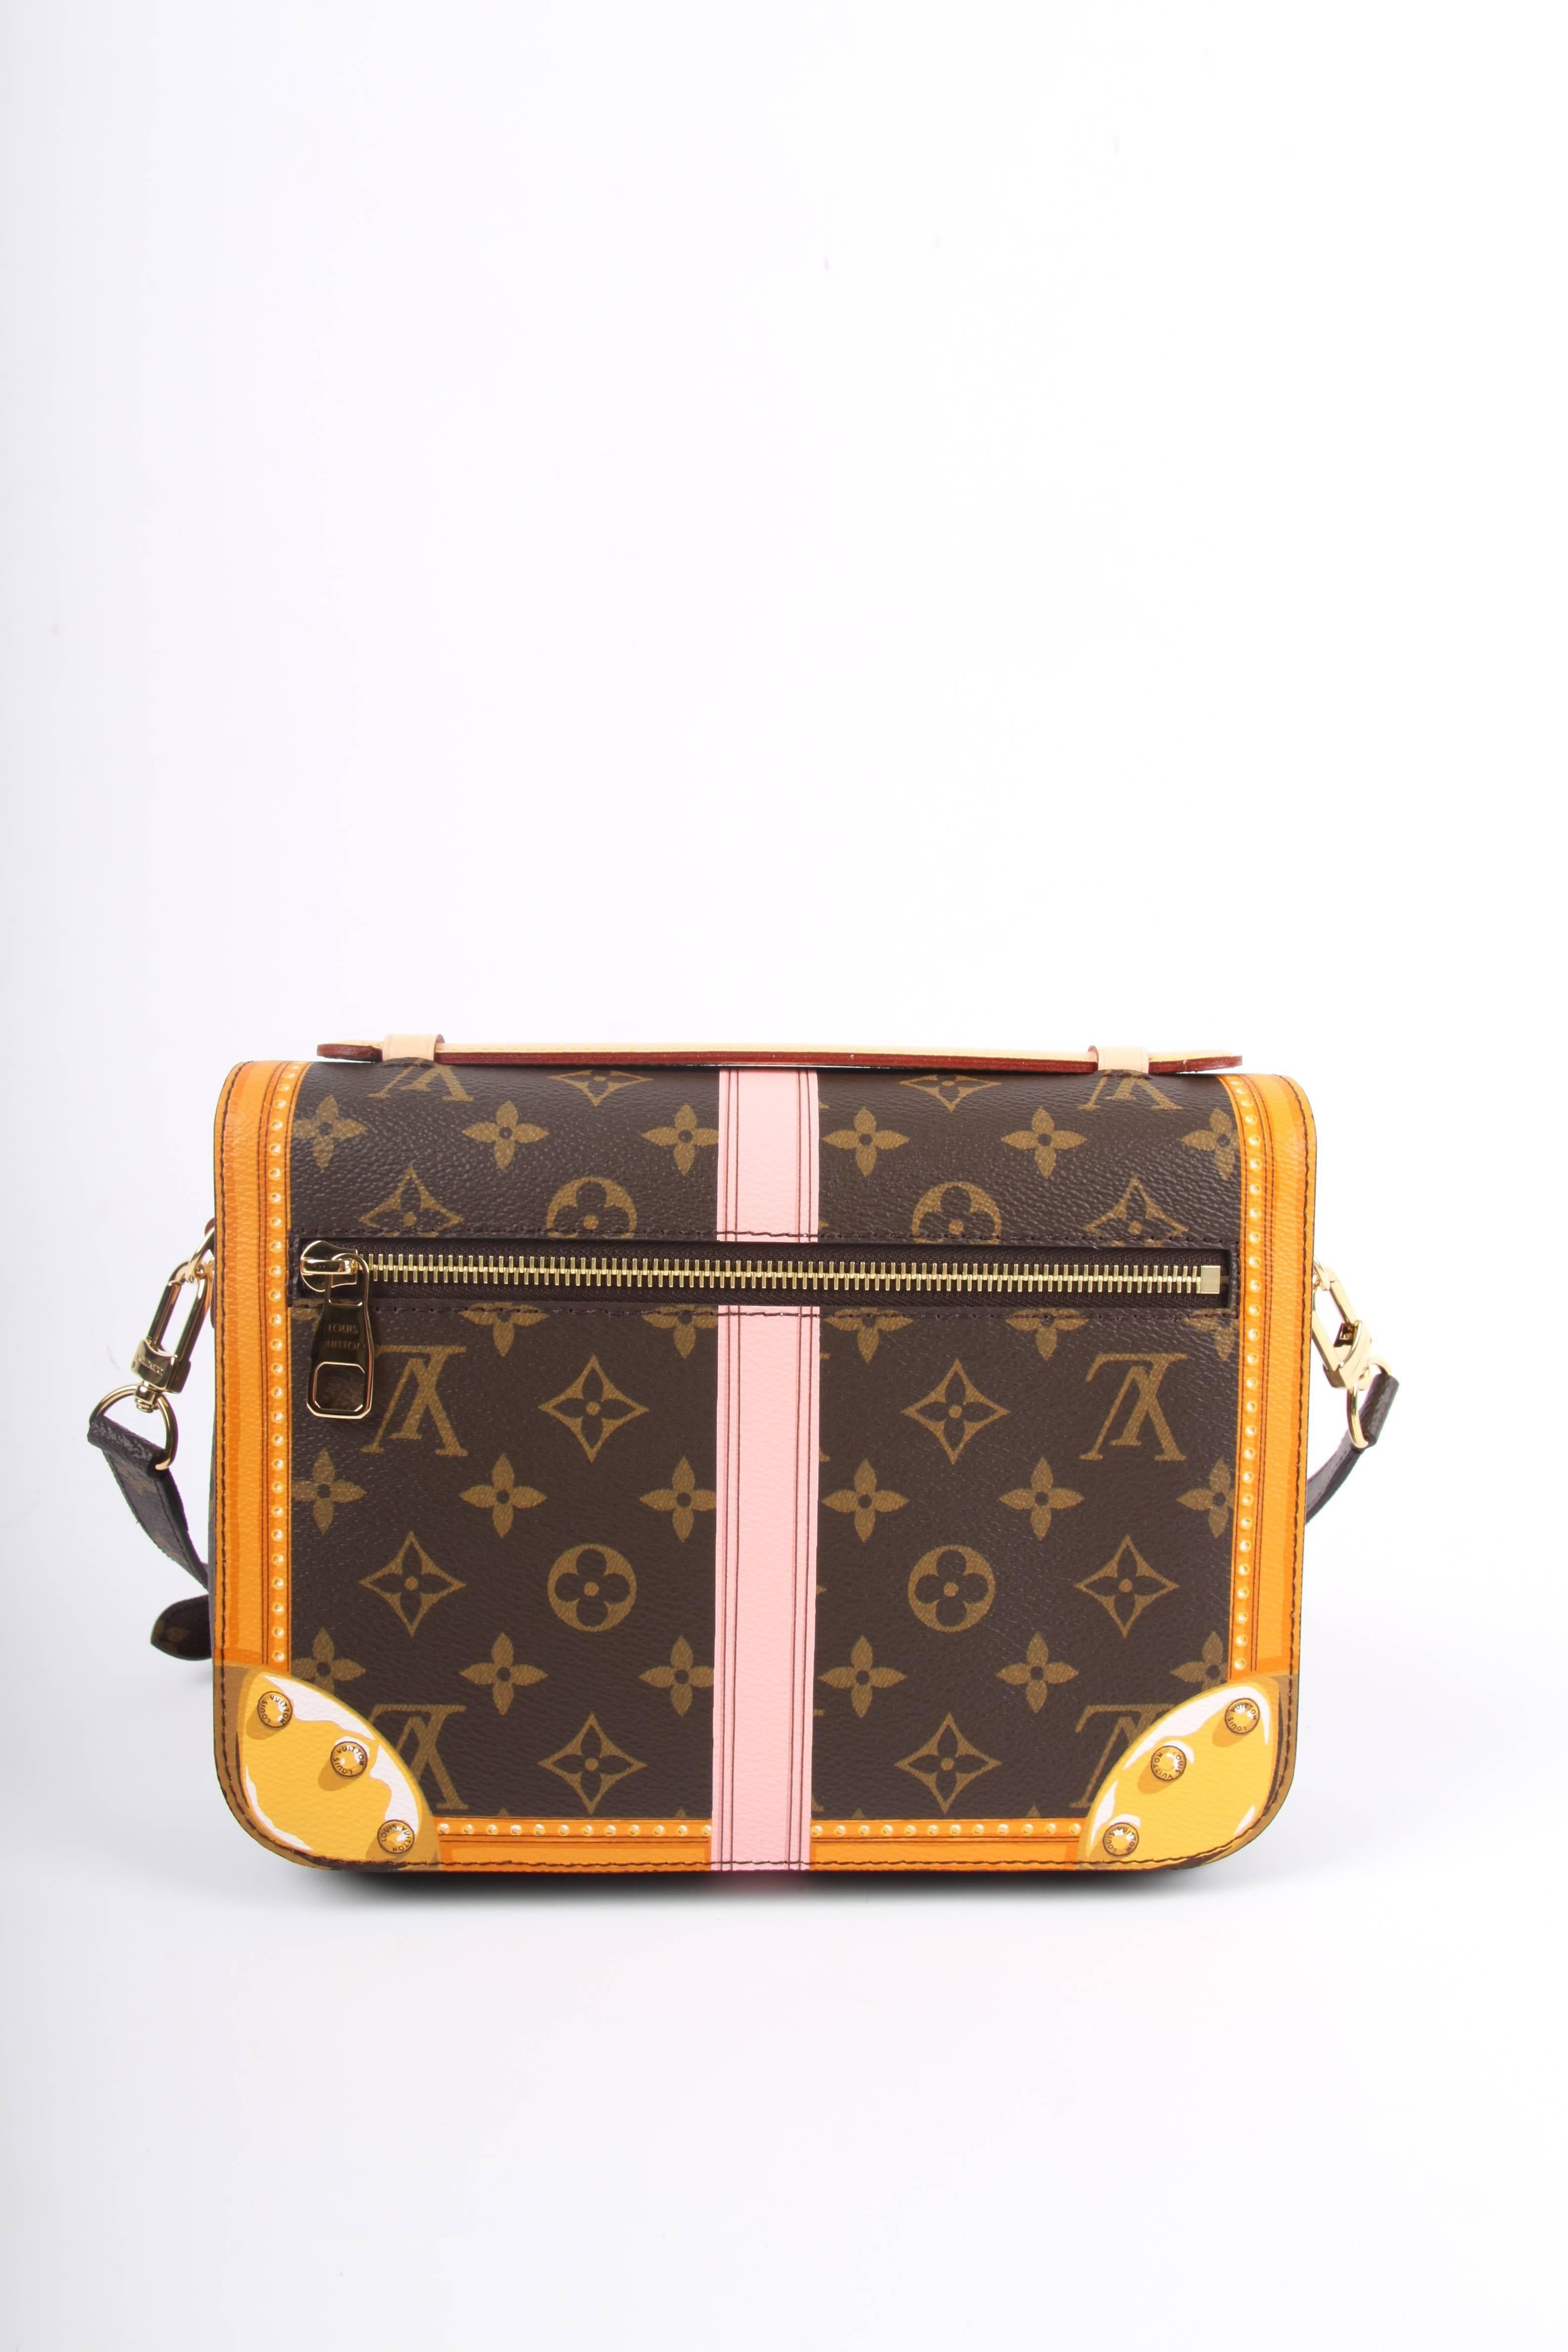 Women's or Men's   Louis Vuitton Brown and Pink Limited Edition Metis Handbag, 2018 